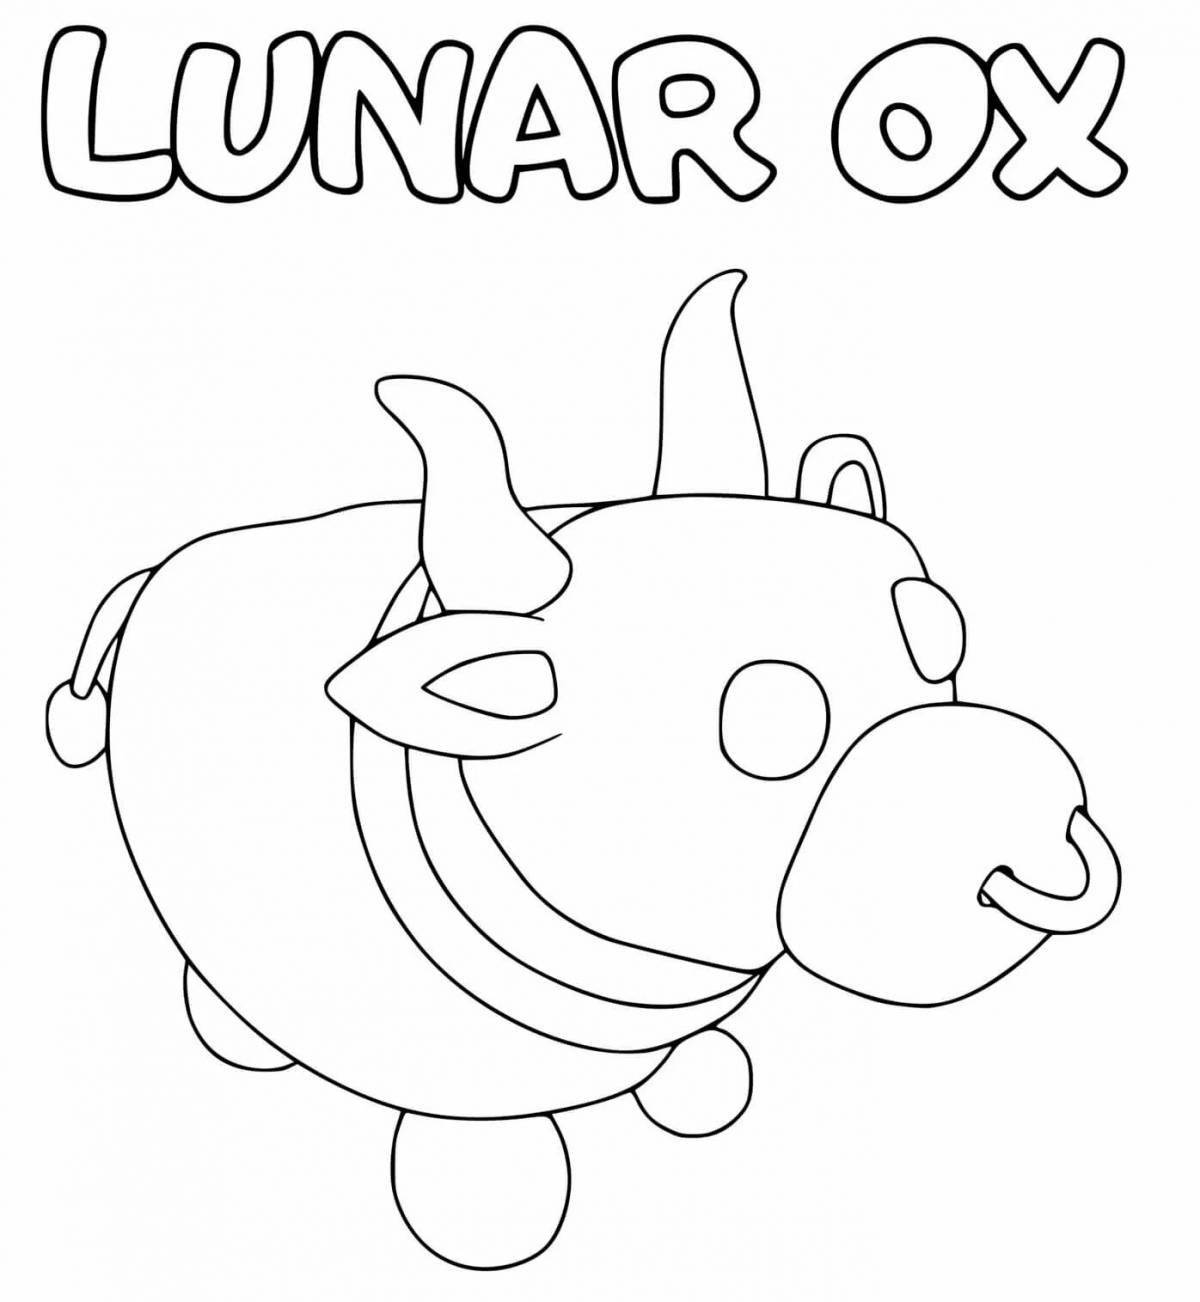 A fascinating cow adoption coloring page